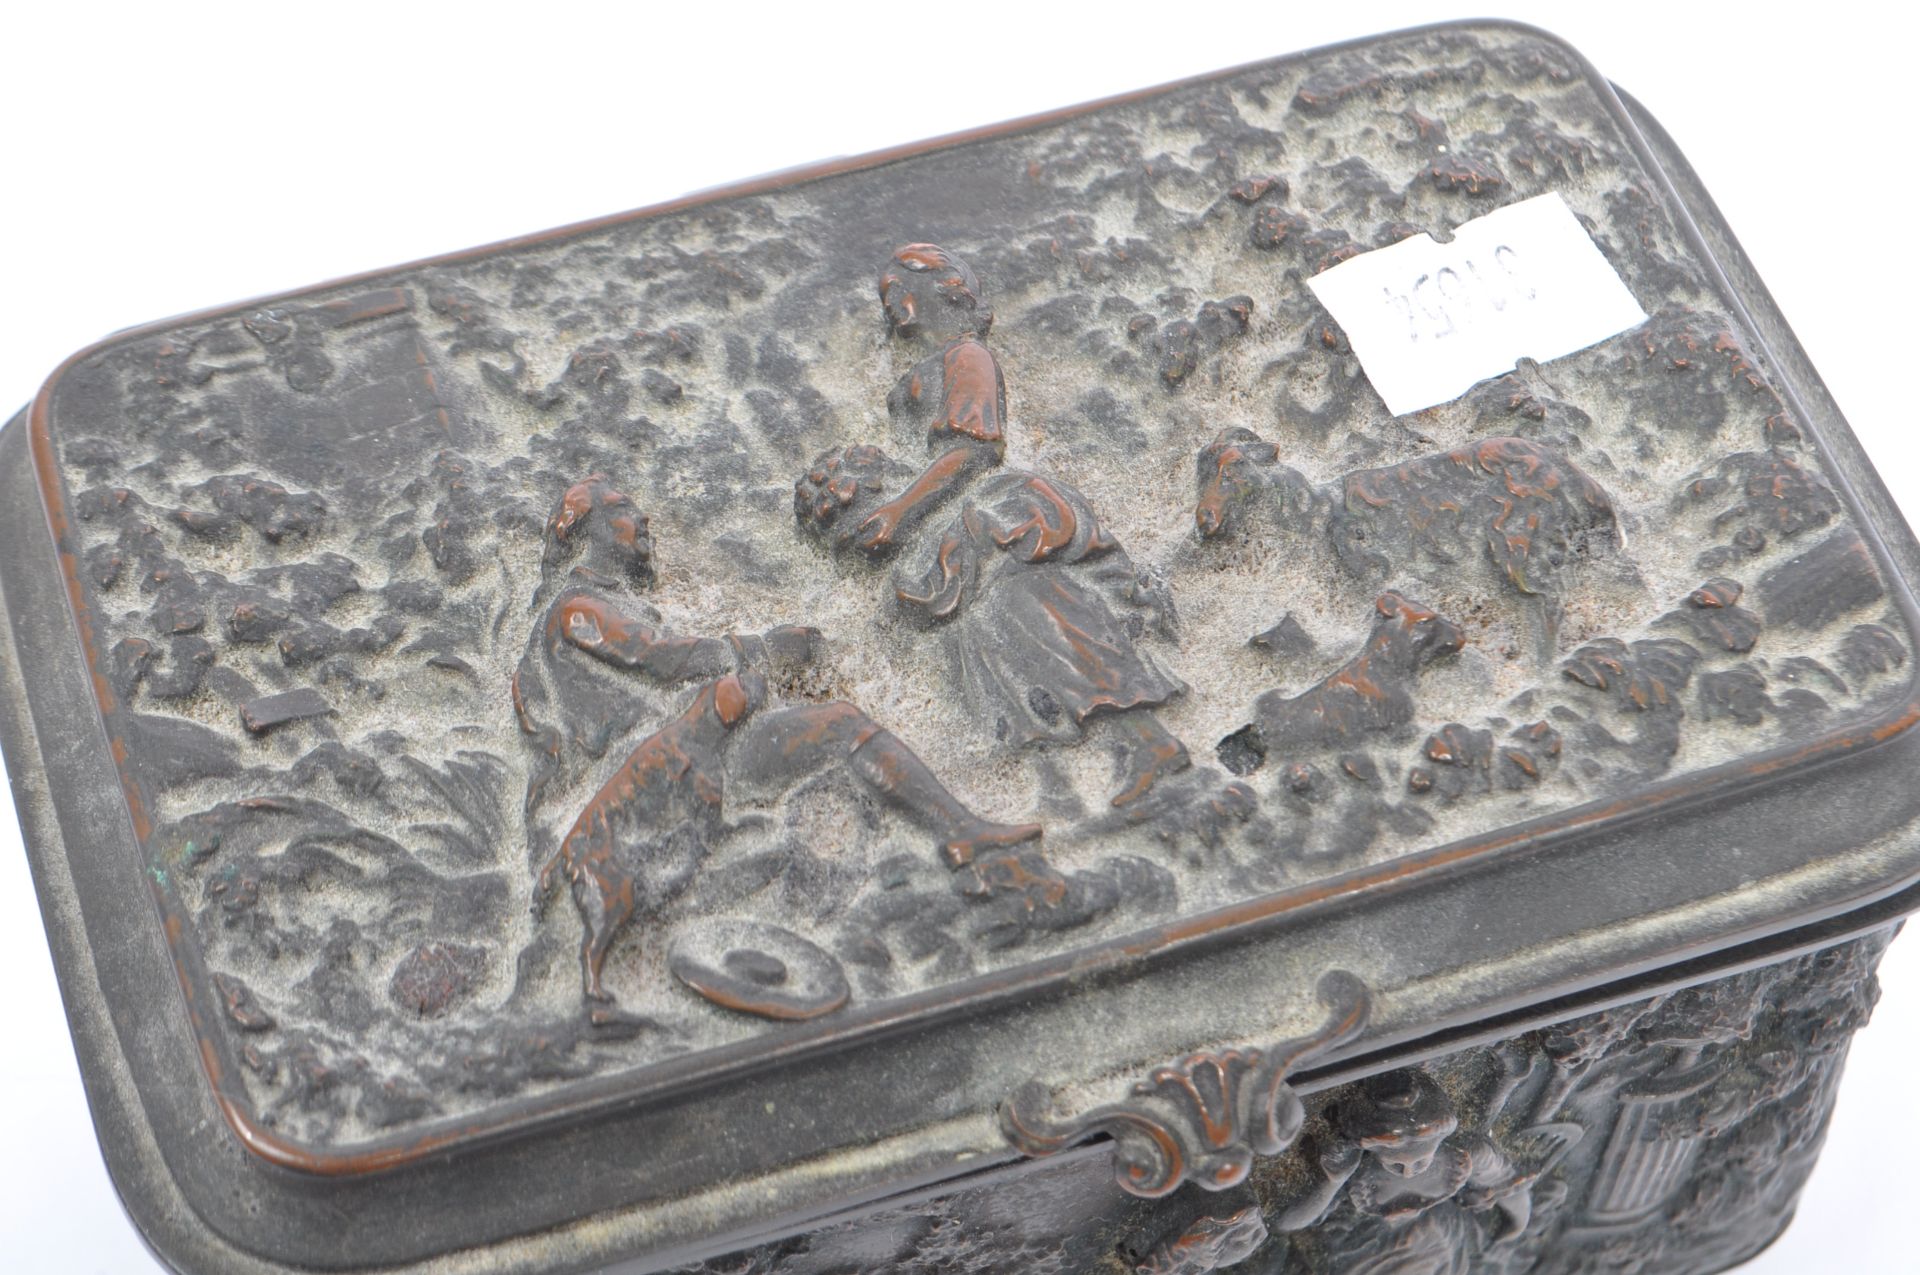 EARLY 20TH CENTURY FRENCH SPELTER LIDDED JEWELLERY CASKET - Image 6 of 6